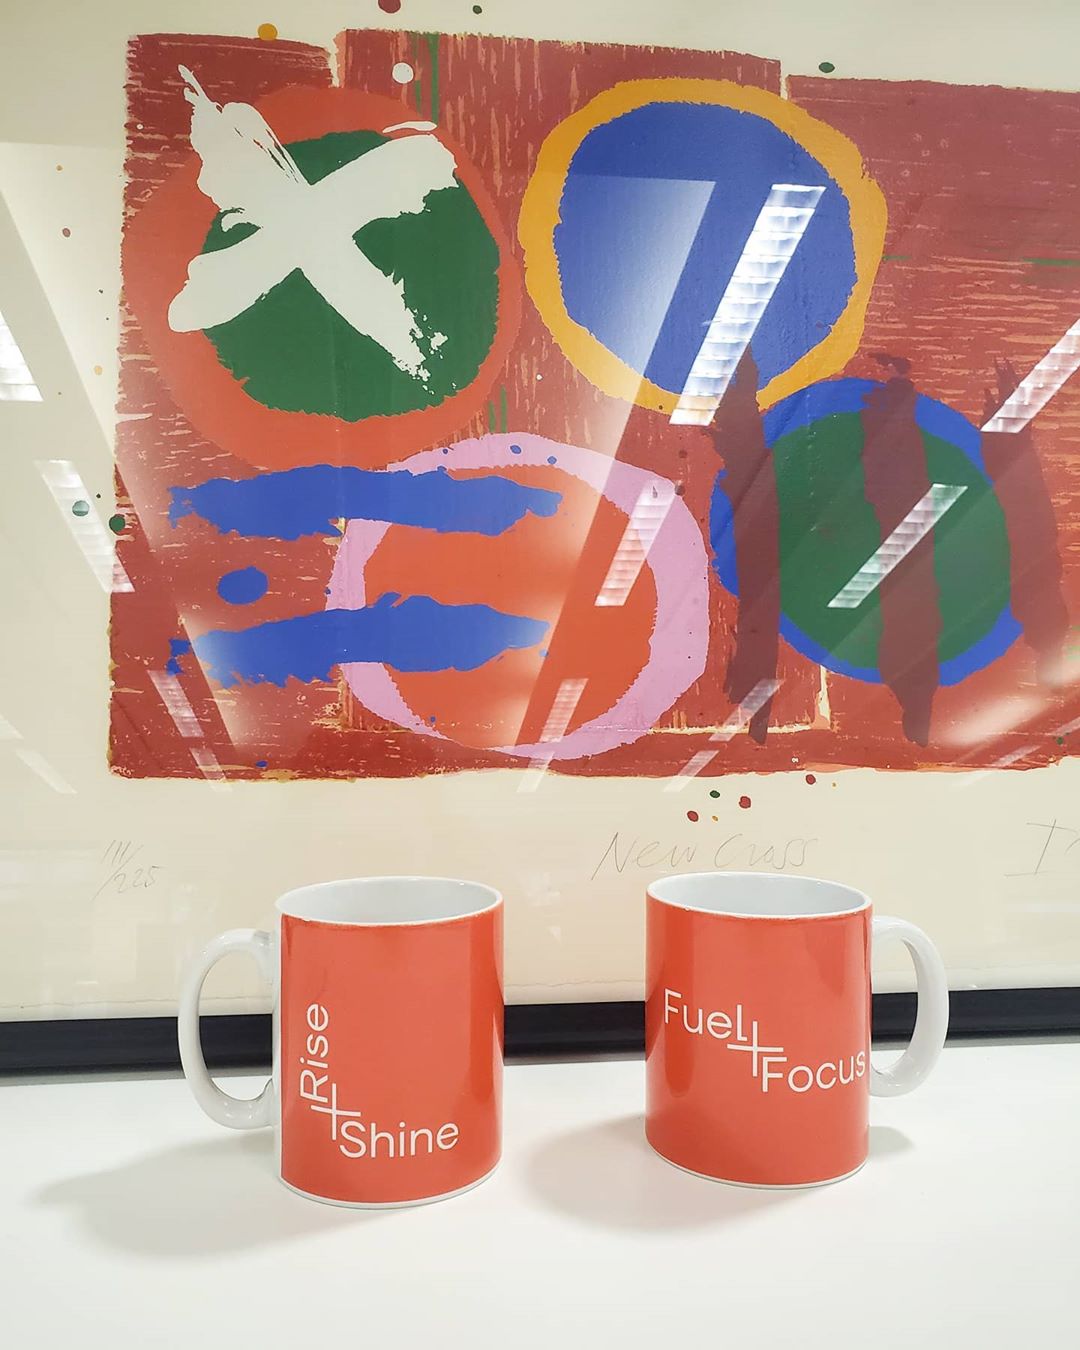 Pretty excited about our latest delivery to the office! Up for testing them out with us? We are always up for a cuppa!